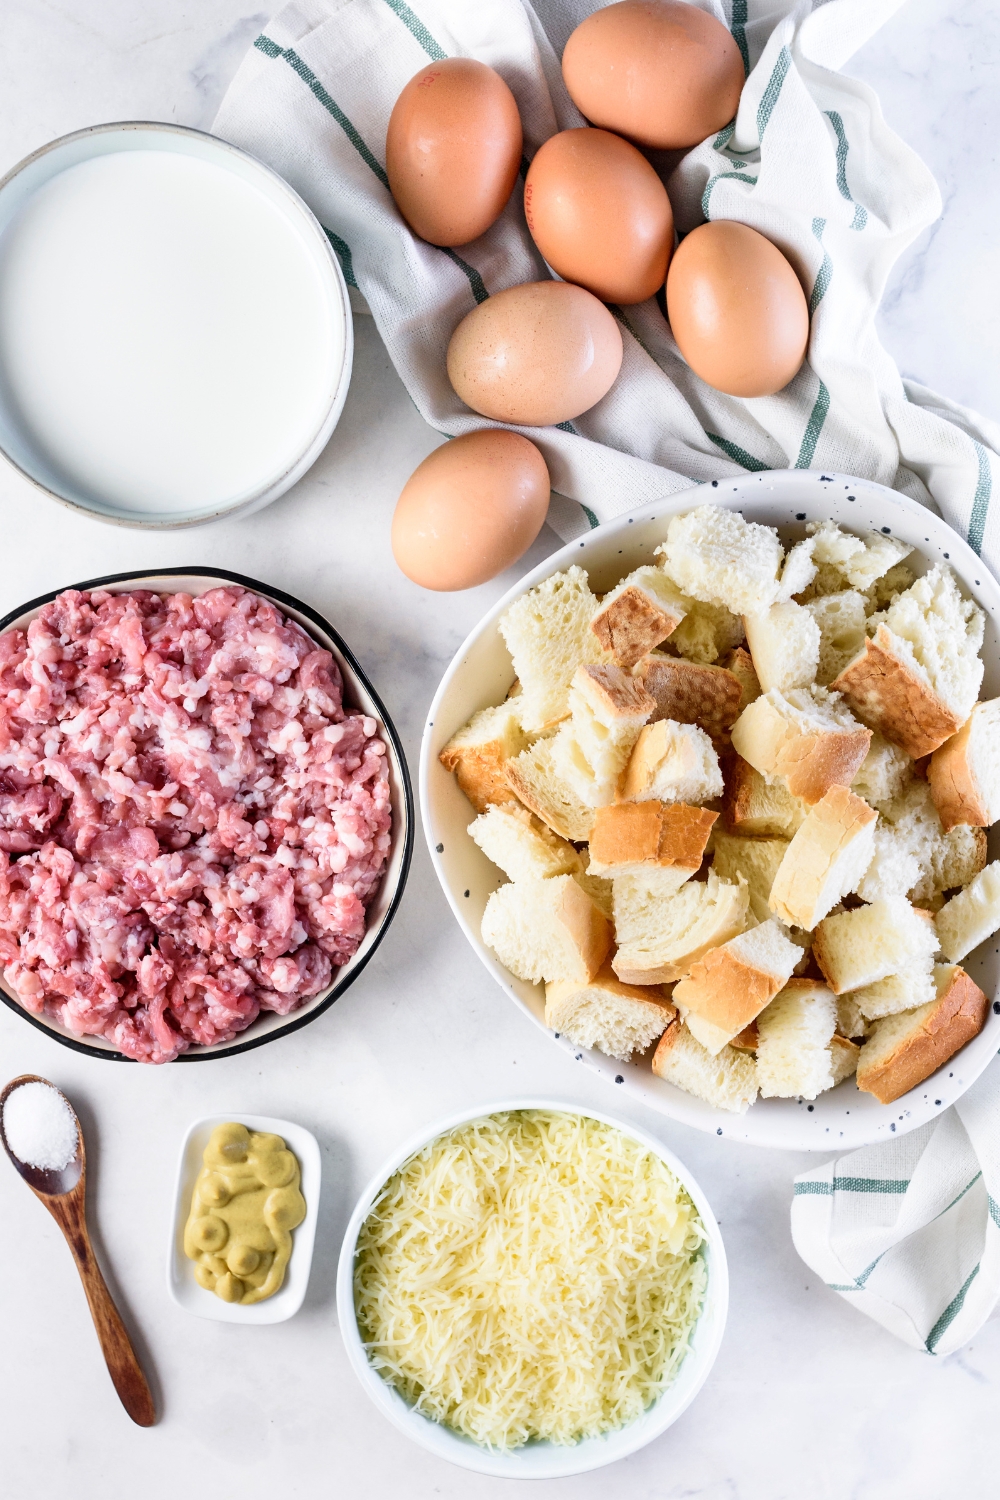 An assortment of ingredients including bowls of raw pork sausage, shredded cheese, mustard, milk, bread cubes, and six eggs wrapped in a dish towel.